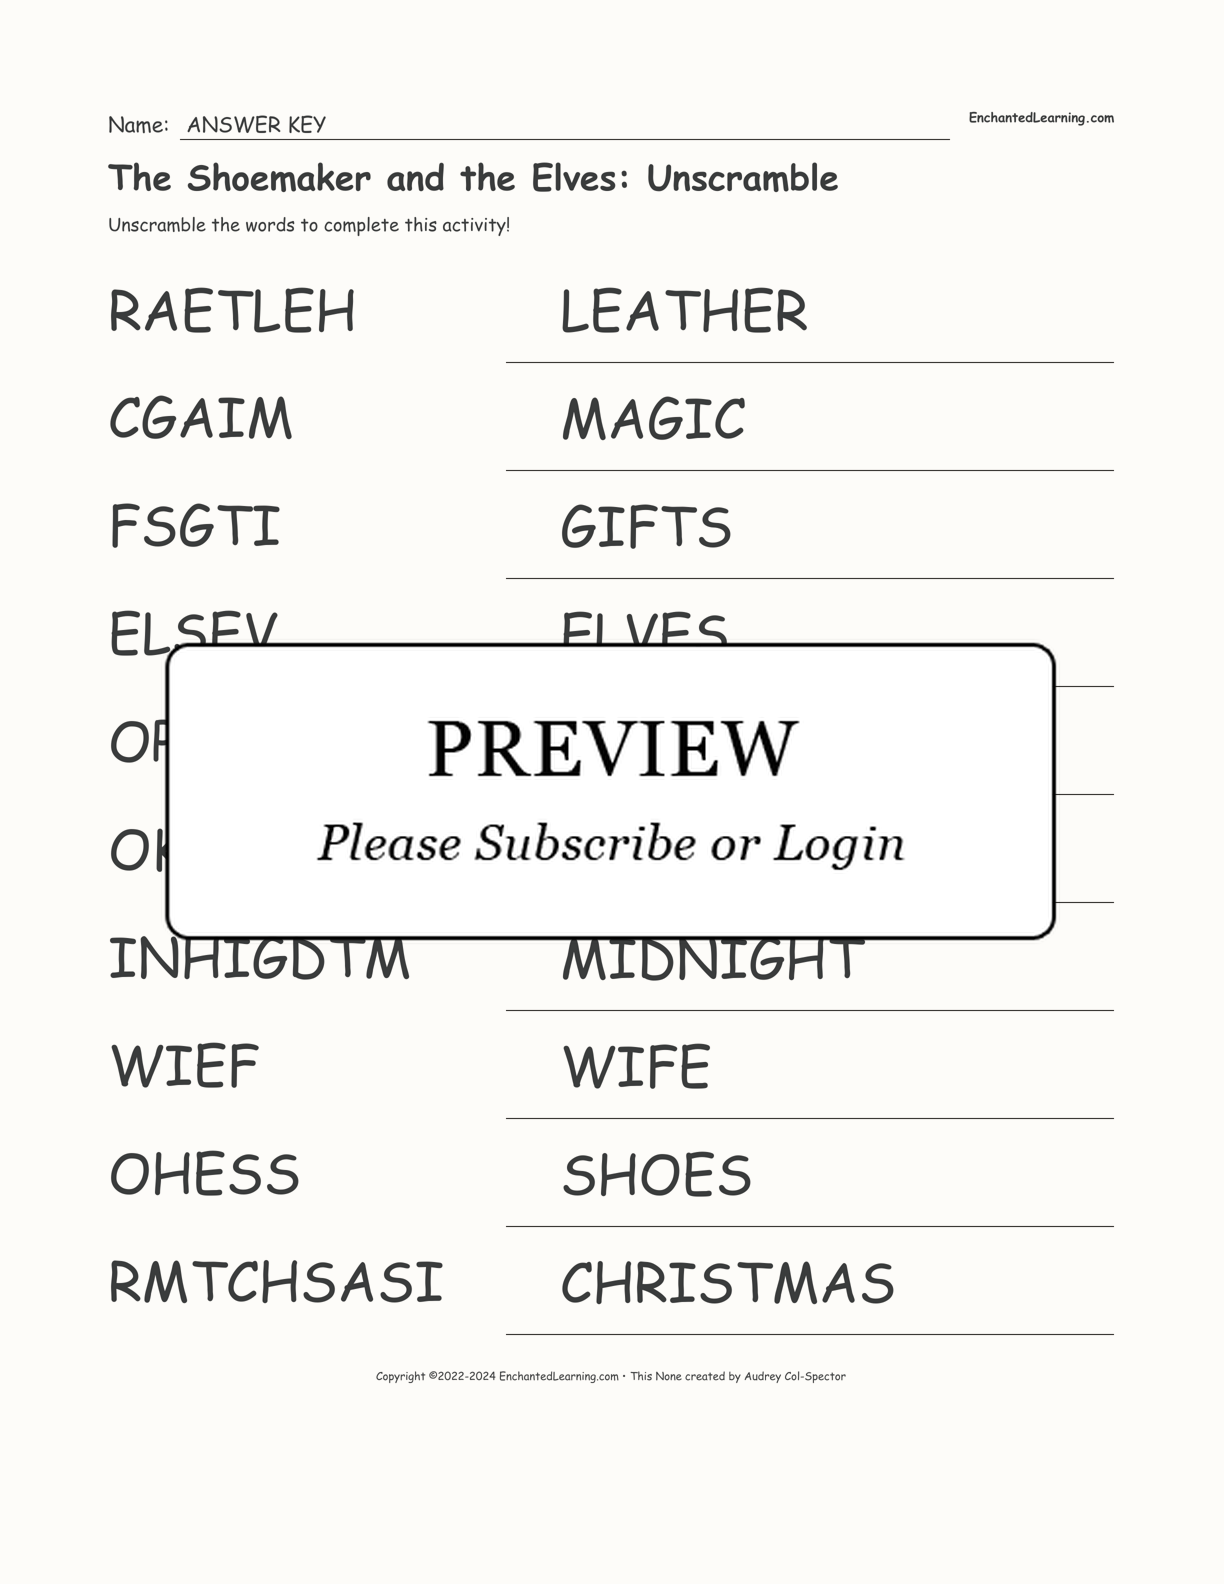 The Shoemaker and the Elves: Unscramble interactive worksheet page 2